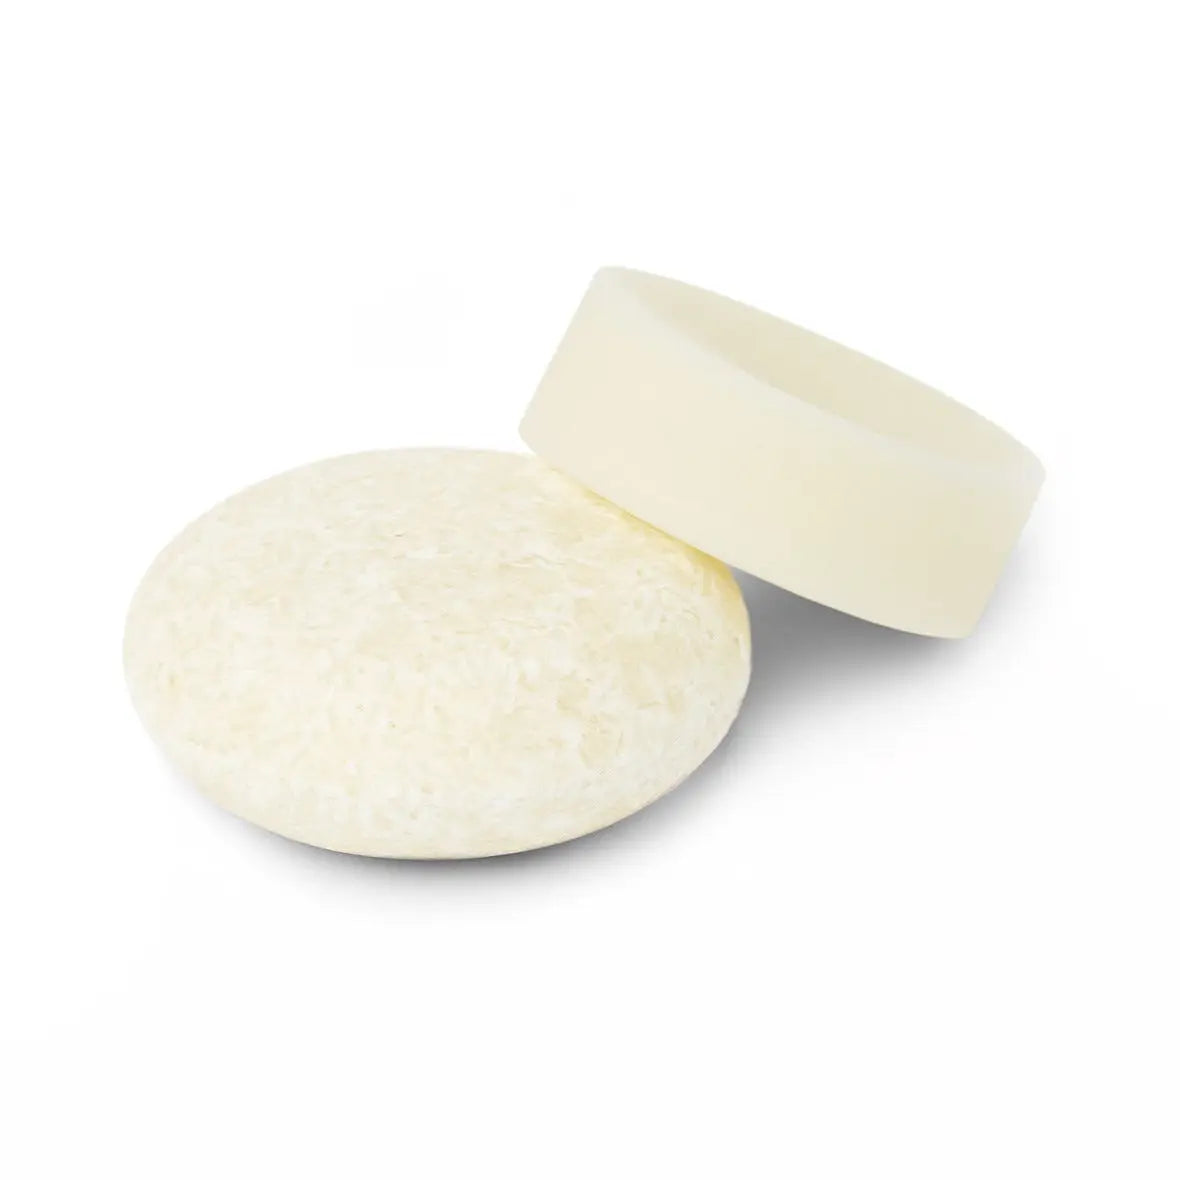 The Hydrator Shampoo and Conditioner Bars - Home Smith